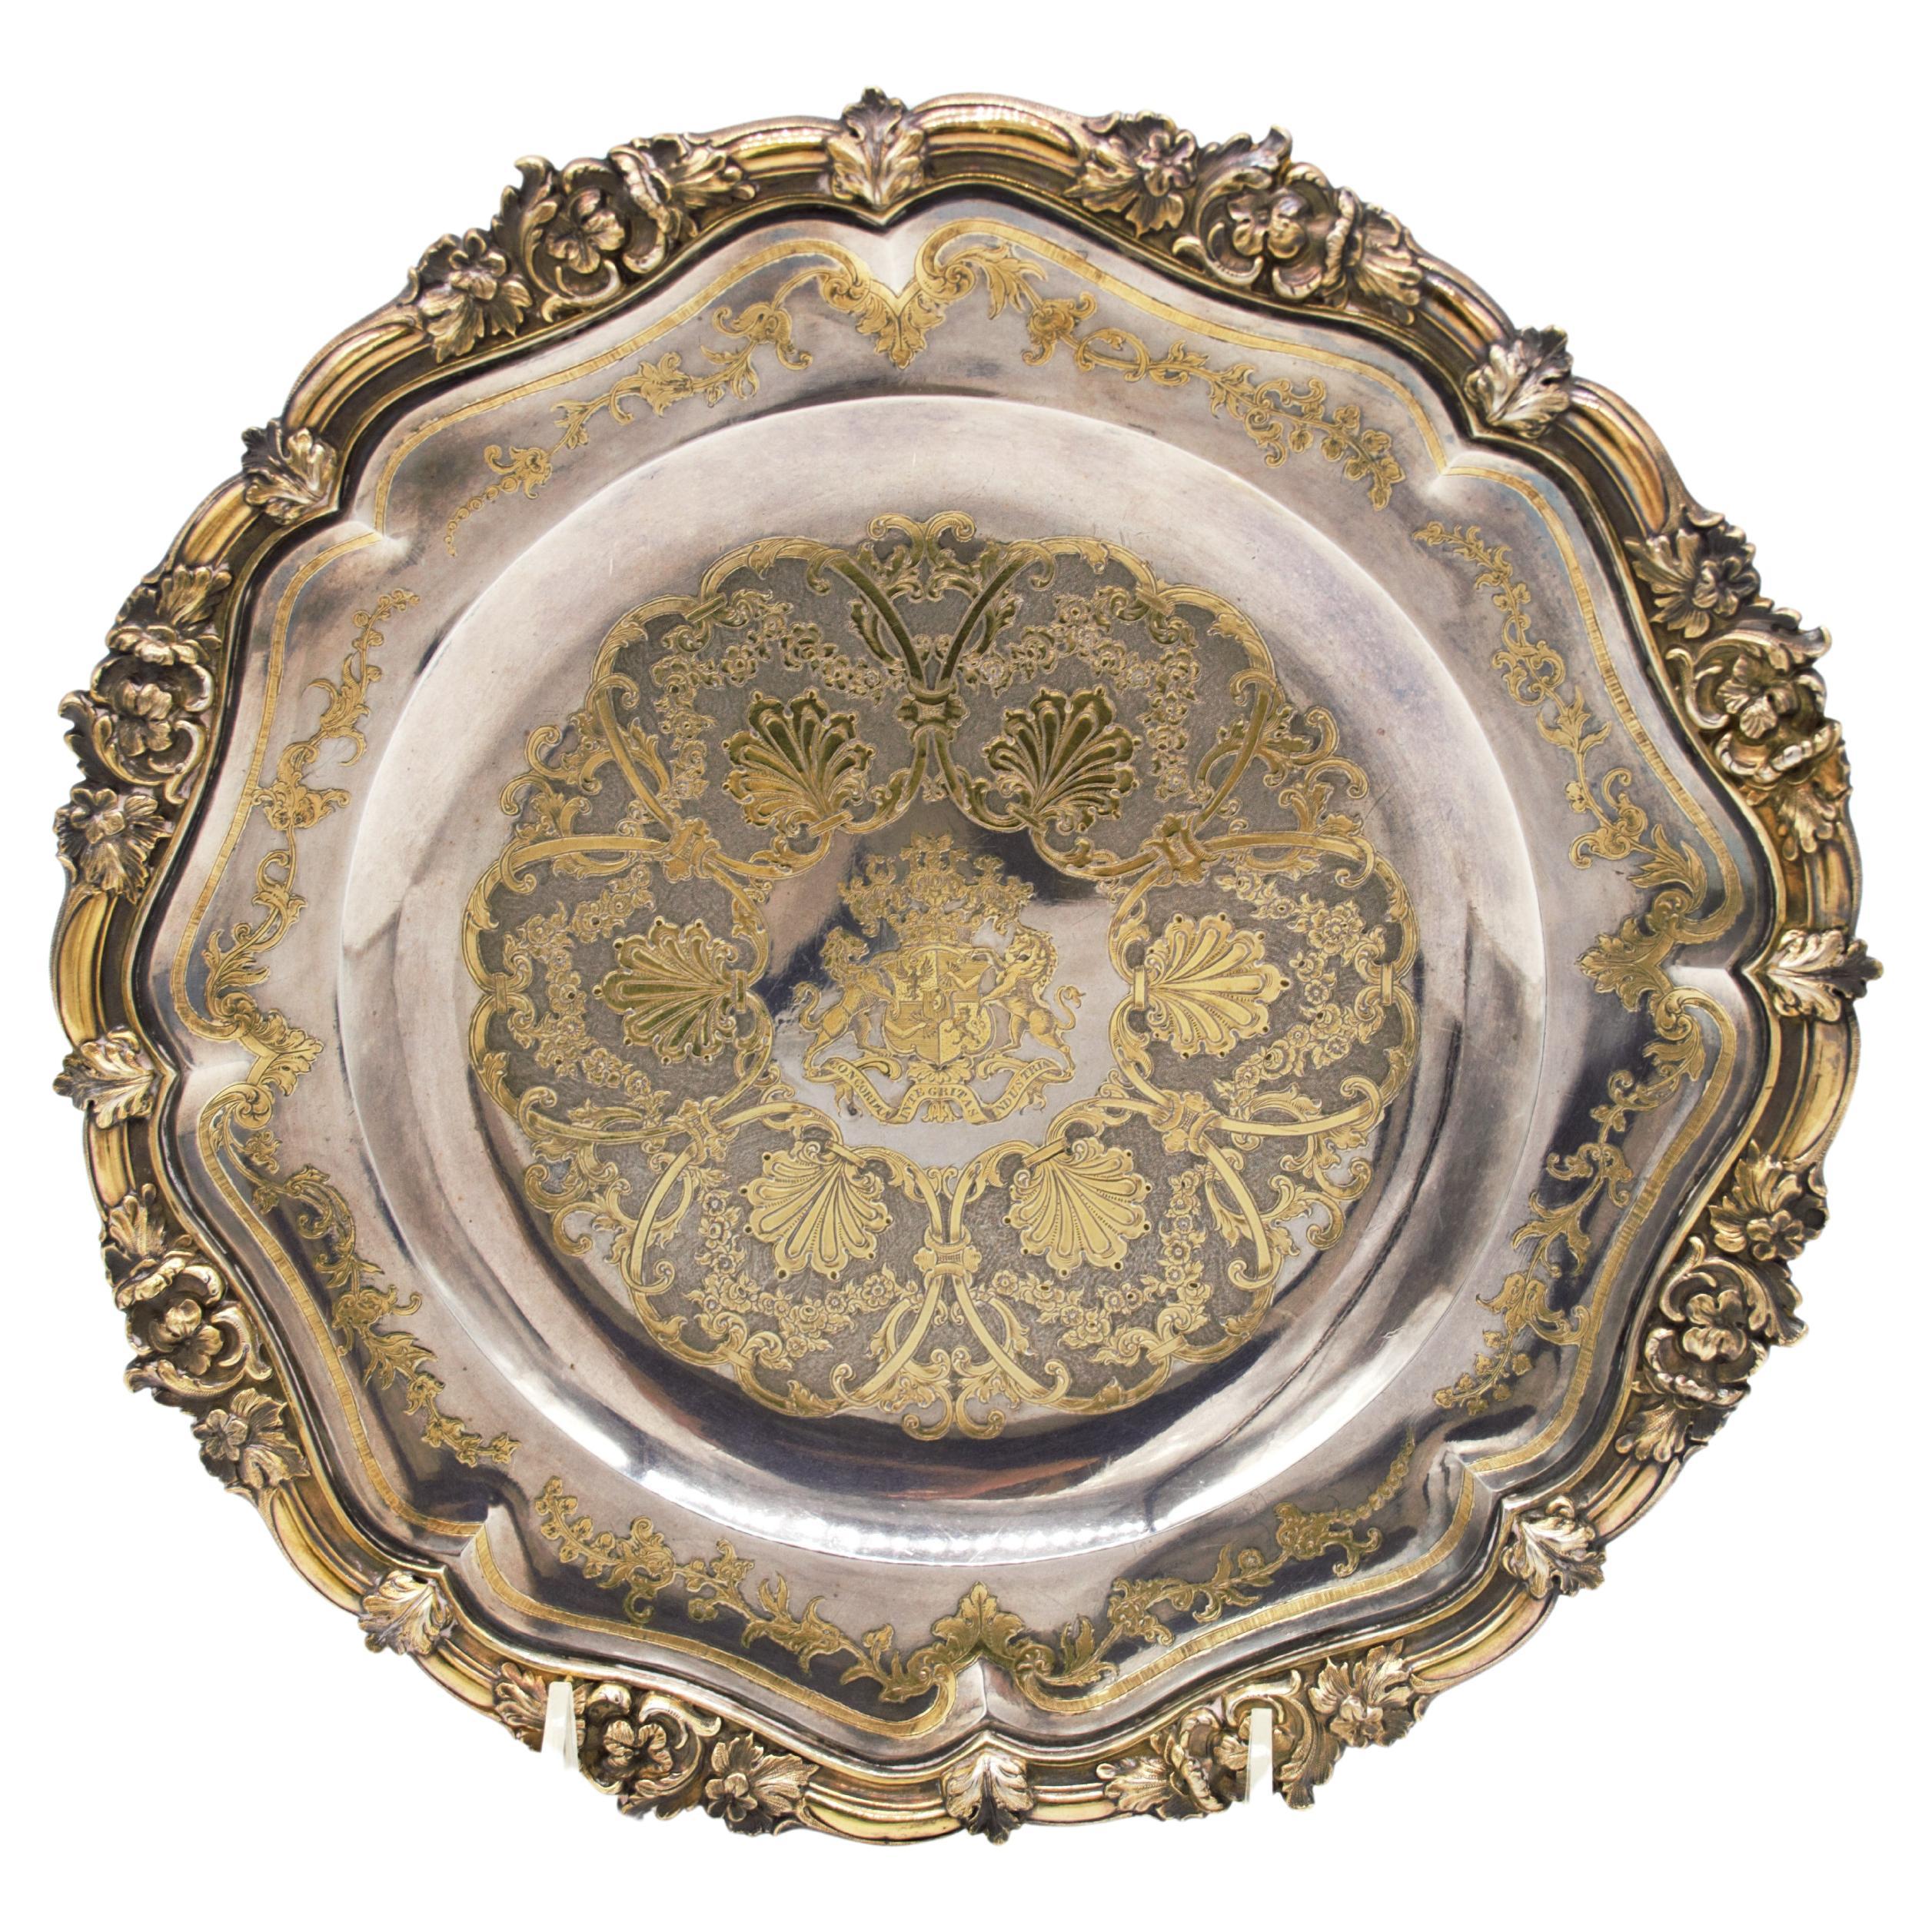 extremely rare french silver presentation plate/ dinner plate. 
this important plate is one of the best quality work and engraving i have ever seen in my life, the outer rim is all adorned 
and ornate with flowers in neoclassical style, and the